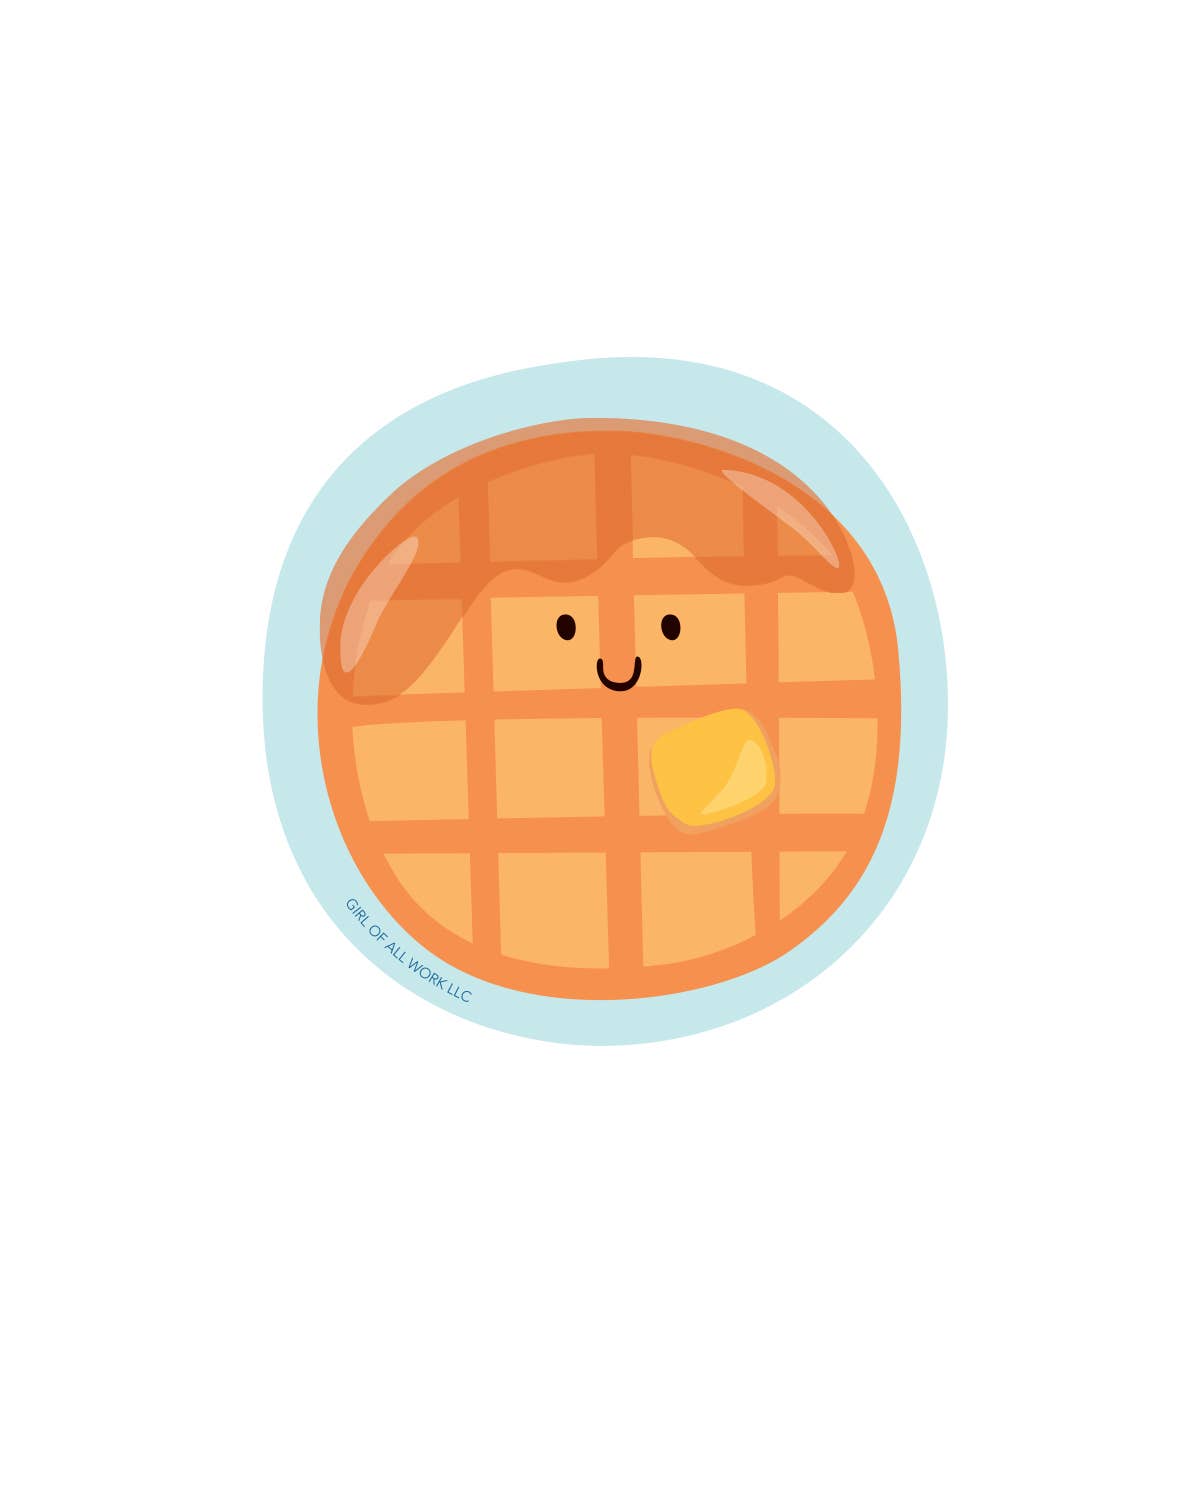 Waffle sticker -- waffle has a face and a butter square + syrup on it 